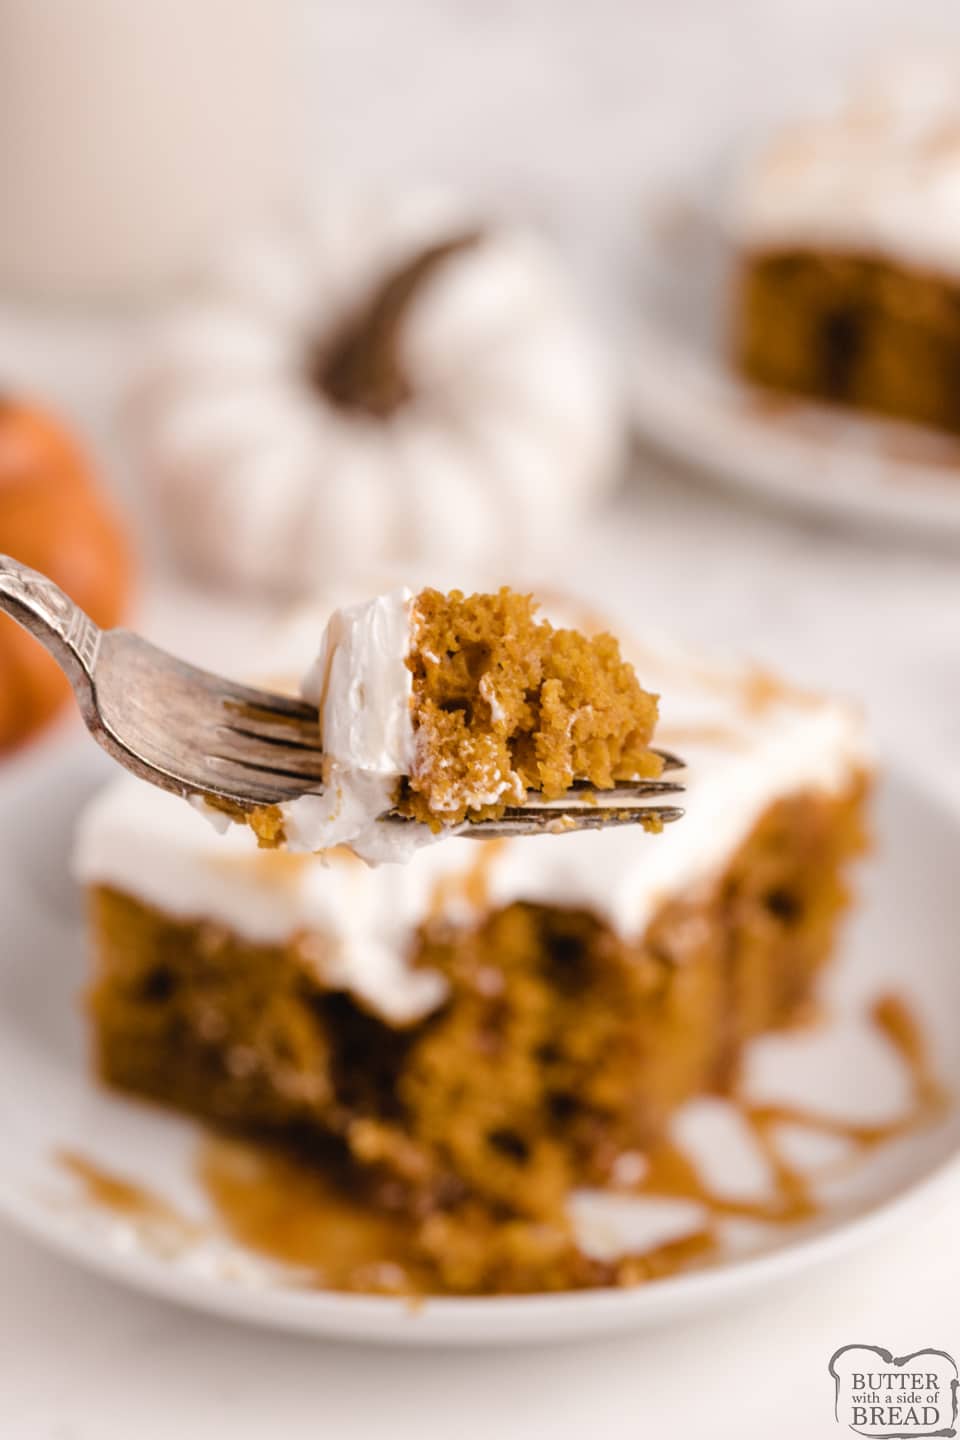 Caramel Pumpkin Poke Cake made with a cake mix, pumpkin, caramel and a simple cream frosting on top! Deliciously decadent poke cake recipe that is perfect for fall.